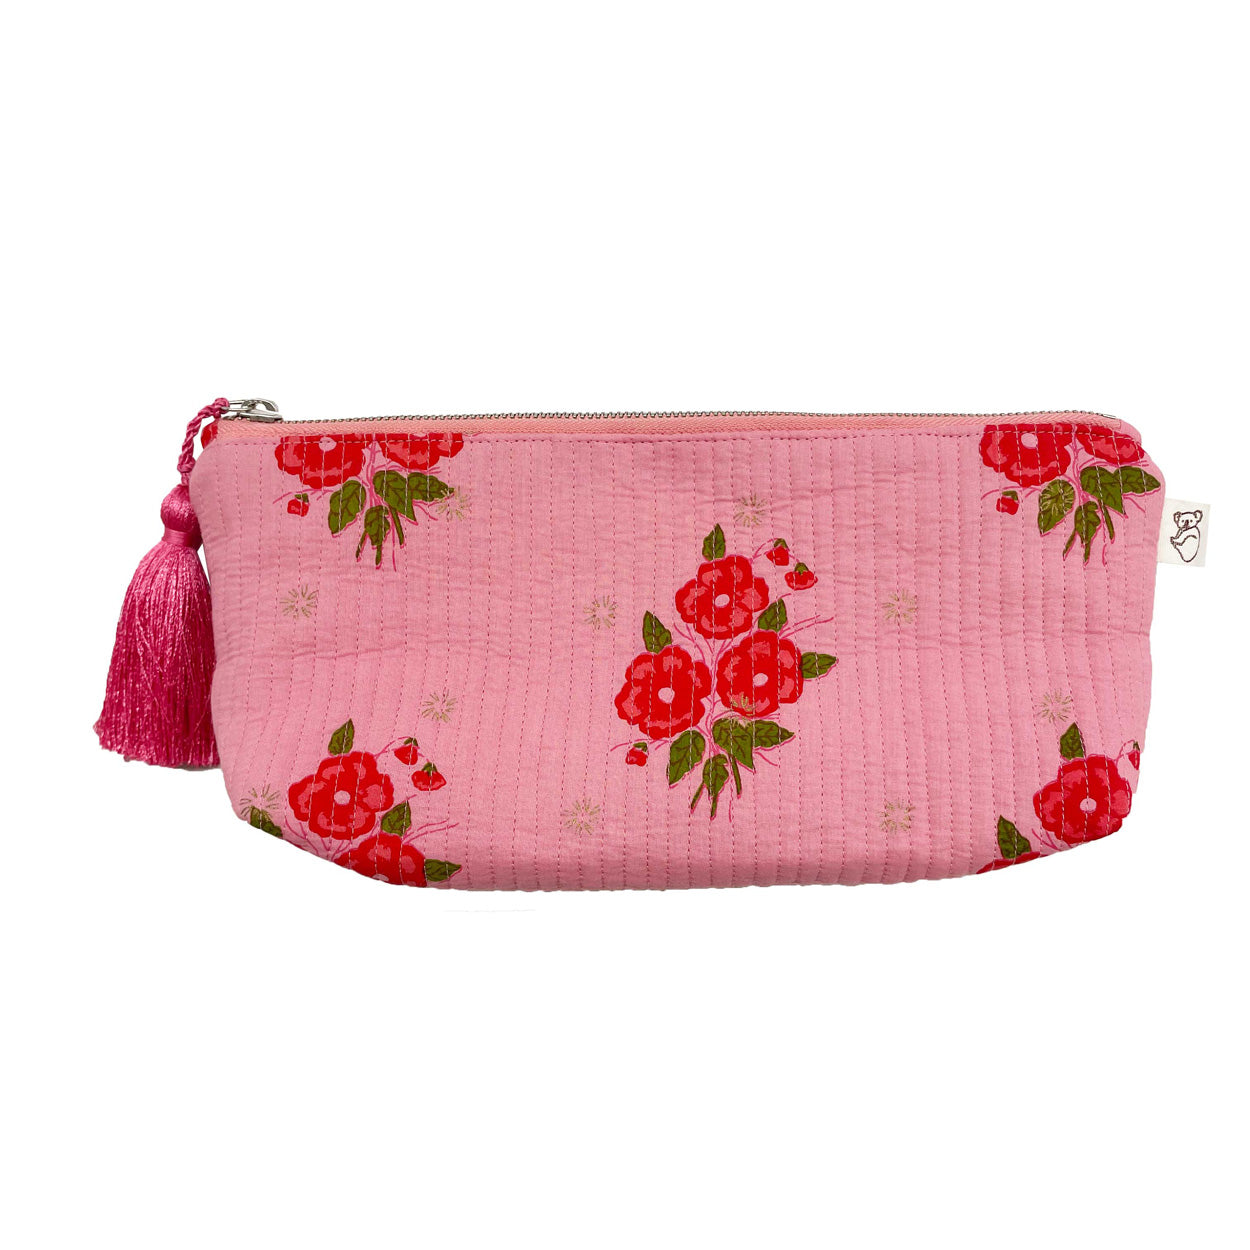 Hold Me Clutch - Quilted Pink Floral  NEW! - Quilted Koala